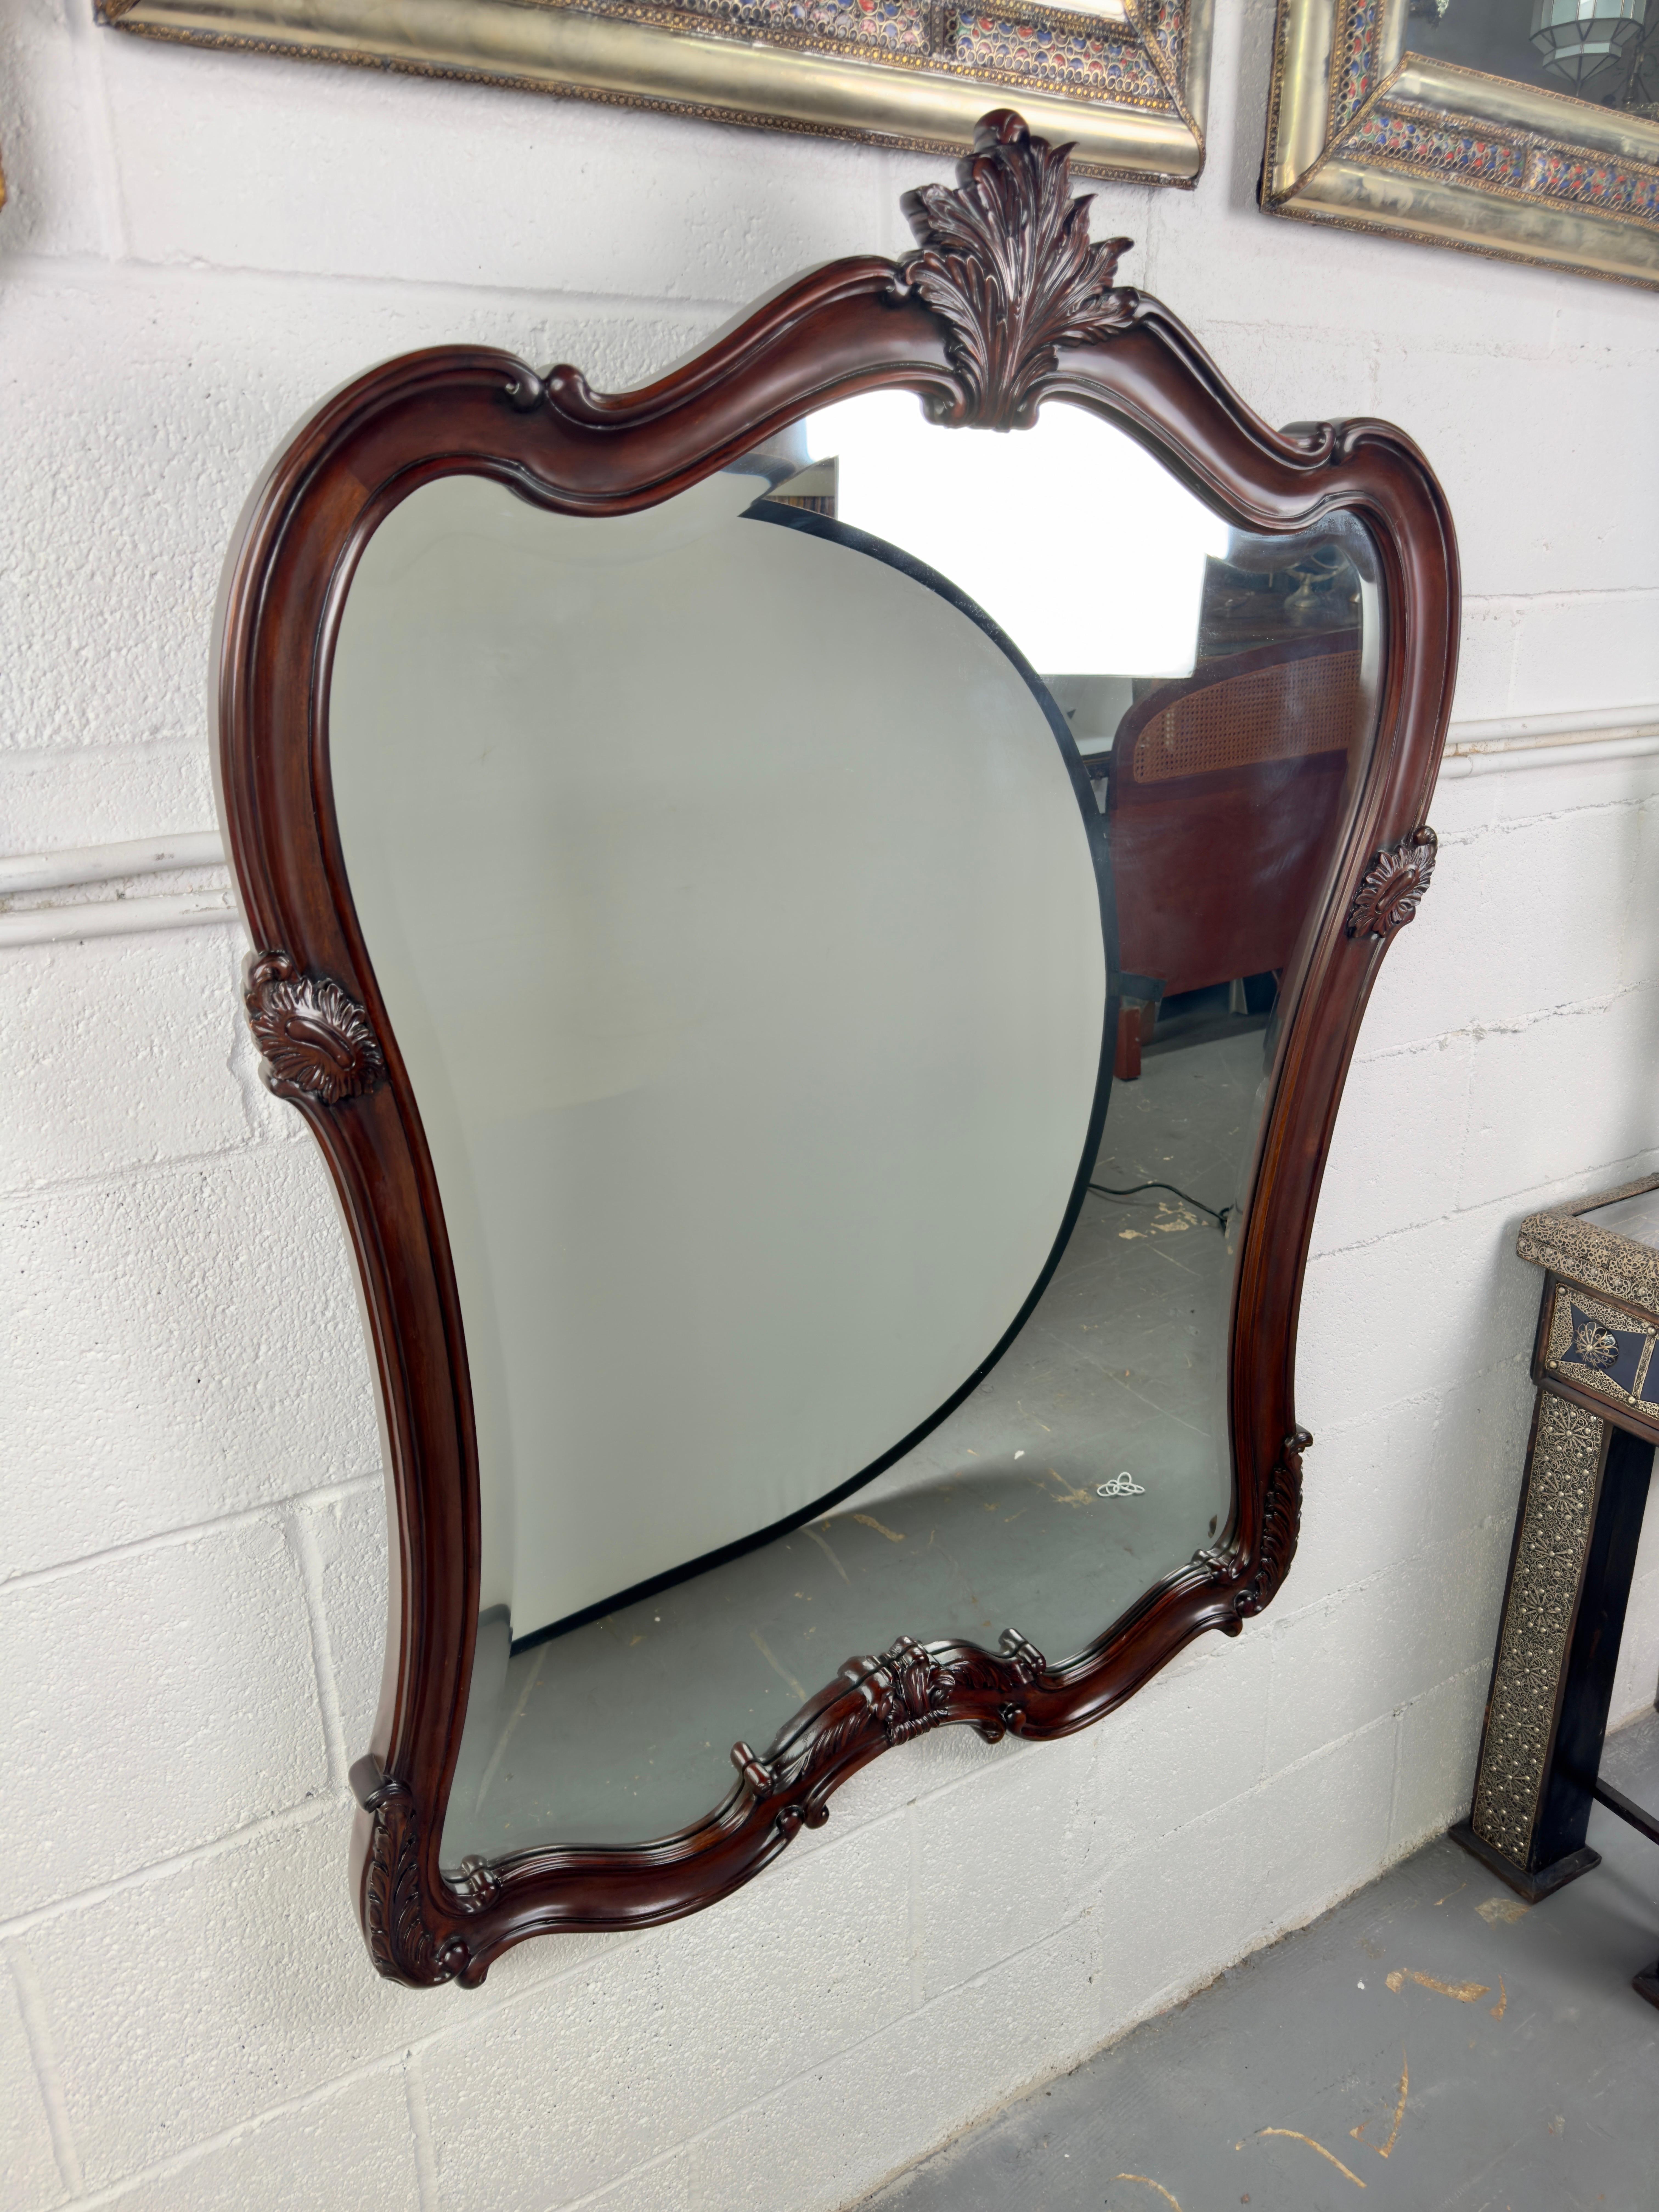 An  exquisite Louis XV style cherry wood  frame mirror. A relic from the late 20th century, this vintage masterpiece exudes opulence and sophistication.
Crafted with meticulous attention to detail, the mirror boasts a cherry wood  frame adorned with